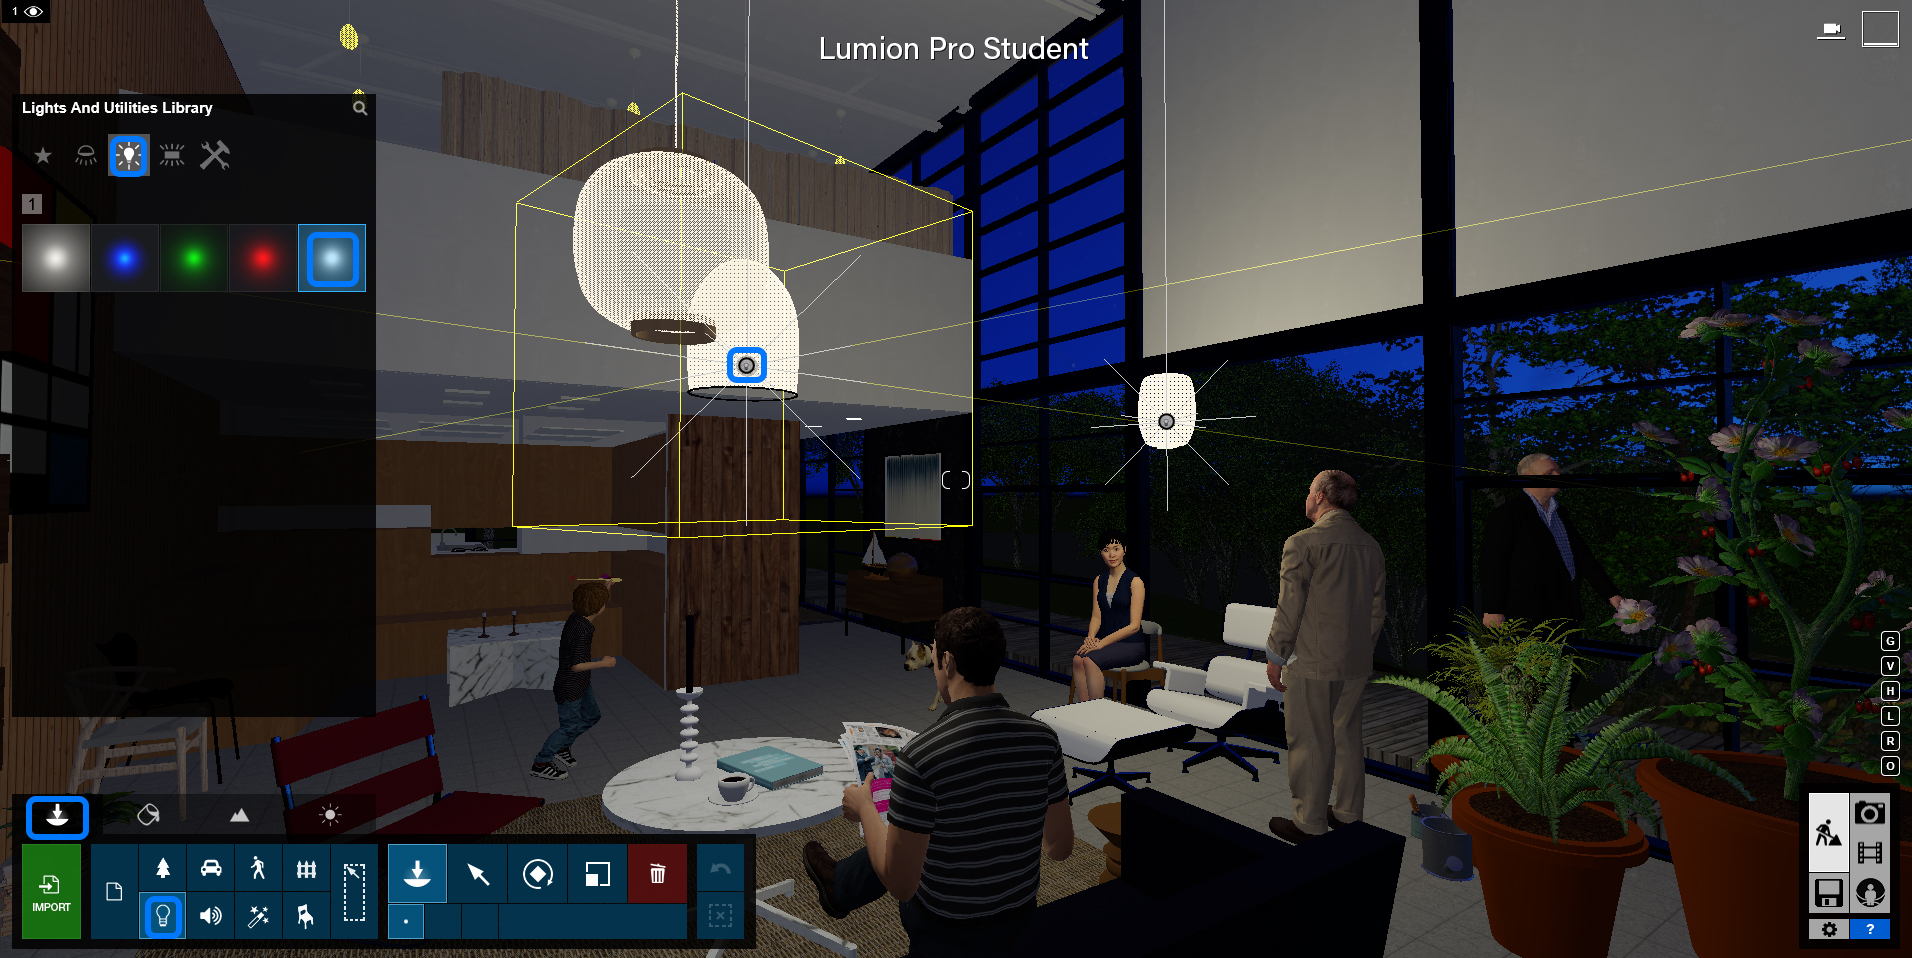 It indicates how to add a Lumion lighting source to a lighting fixture.